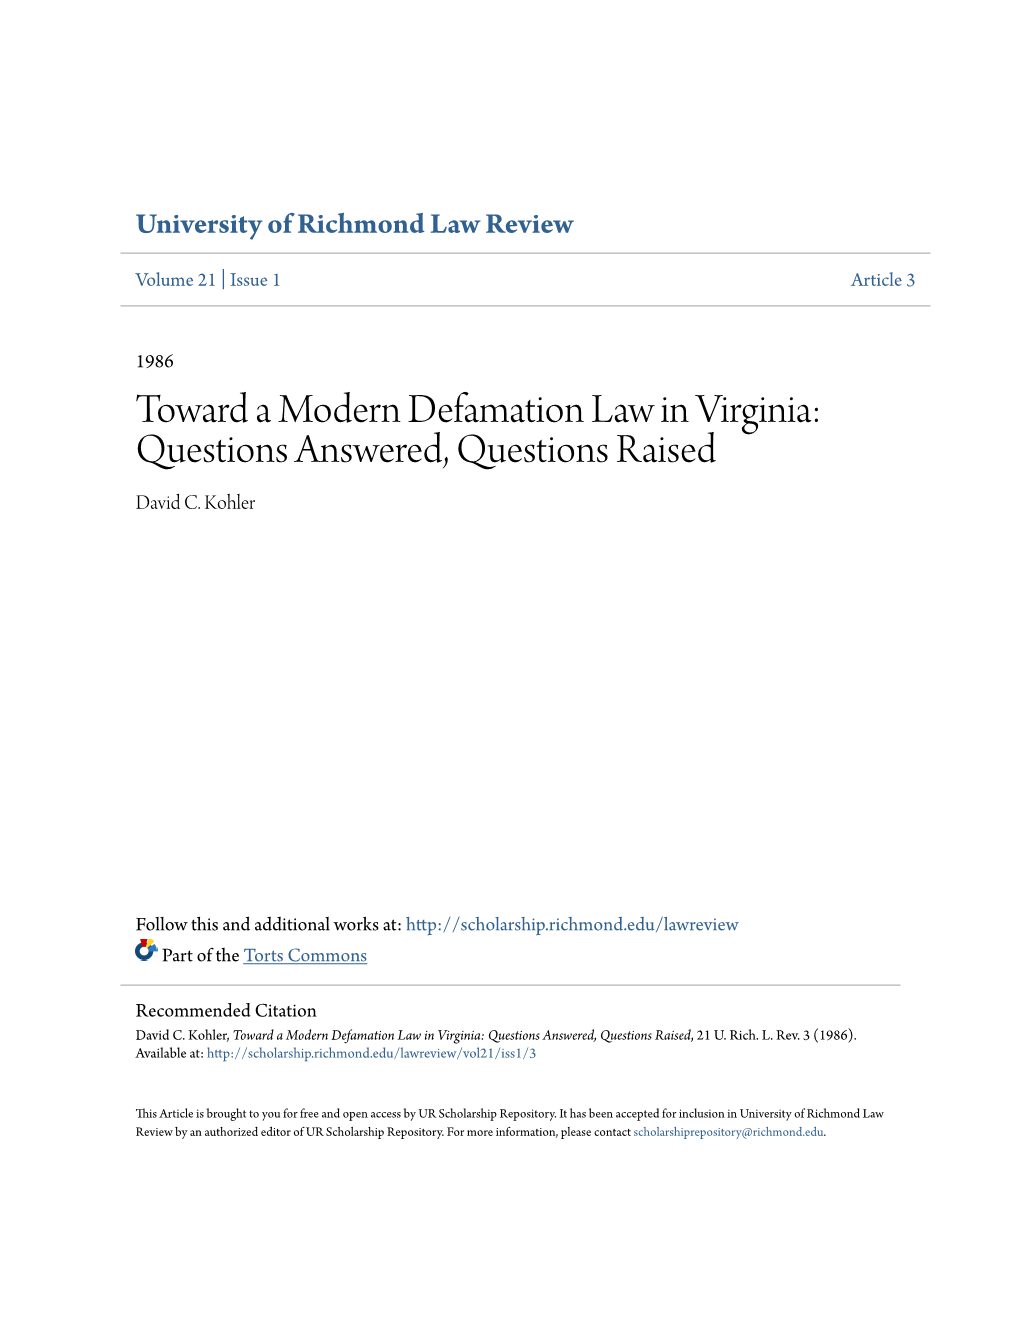 Toward a Modern Defamation Law in Virginia: Questions Answered, Questions Raised David C